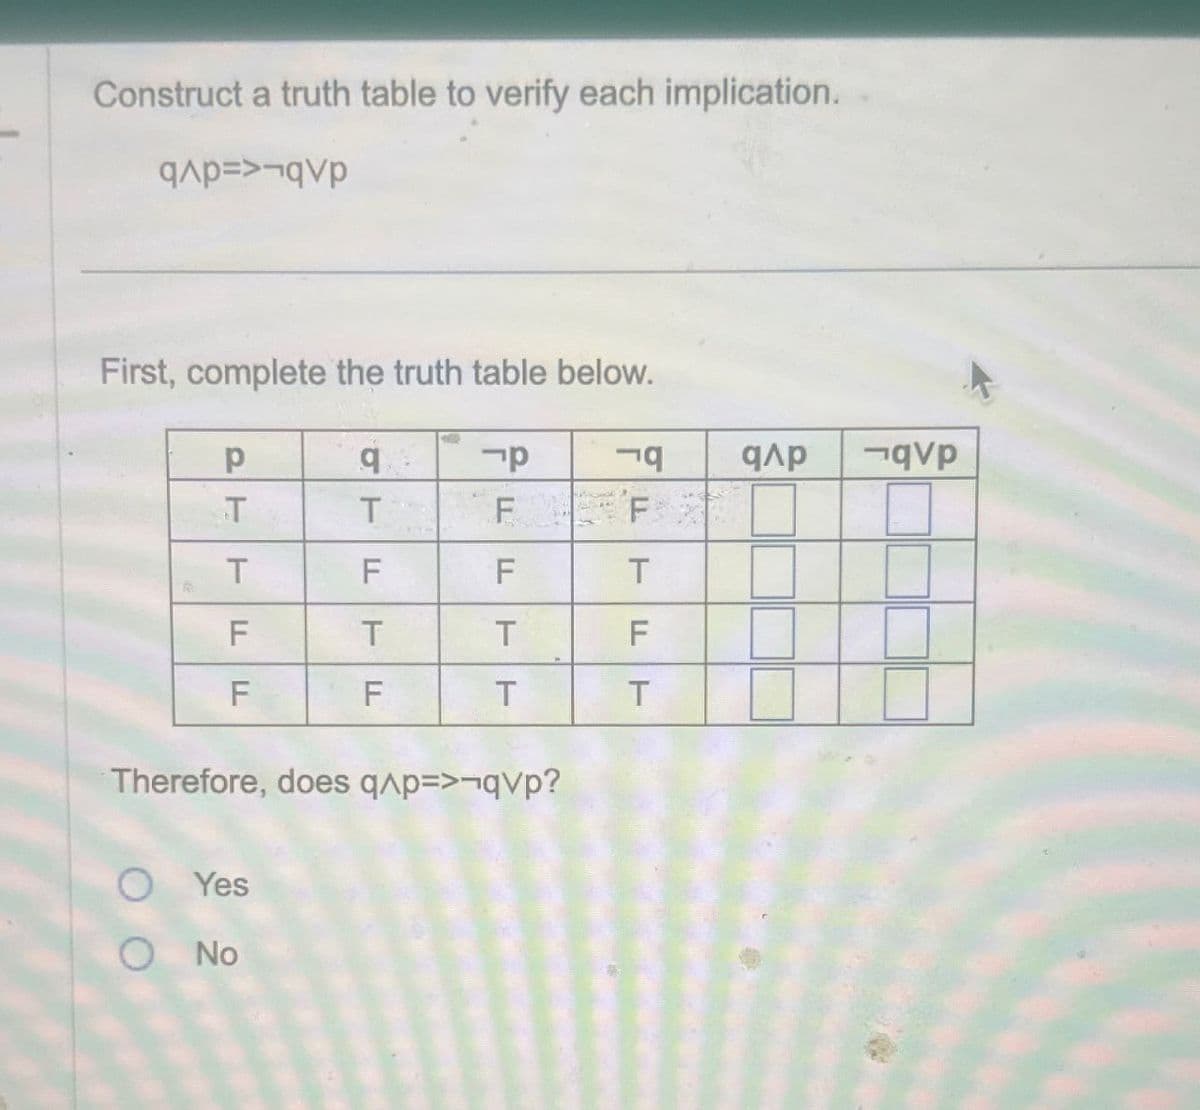 Construct a truth table to verify each implication.
qp=>¬qvp
First, complete the truth table below.
PT
q
-p
19
ΦΡ
¬qVp
T
T
F
F
T
F
F
T
F
T
T
F
F
F
T
T
Therefore, does q^p=>¬qvp?
O Yes
O No